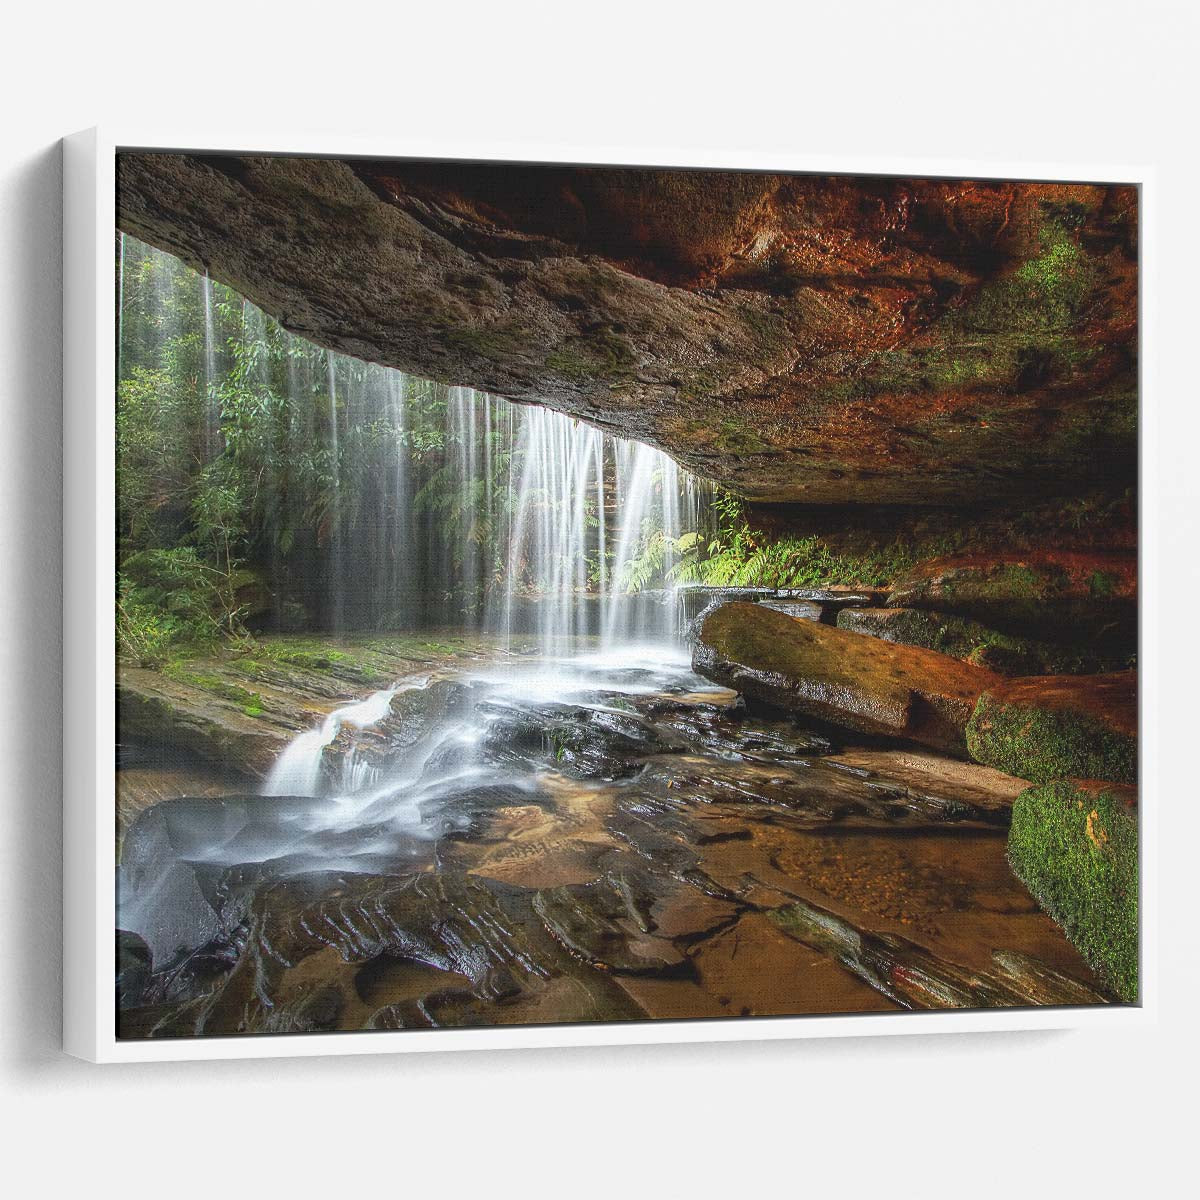 Somesby Falls Cave & Moss Landscape Wall Art by Luxuriance Designs. Made in USA.